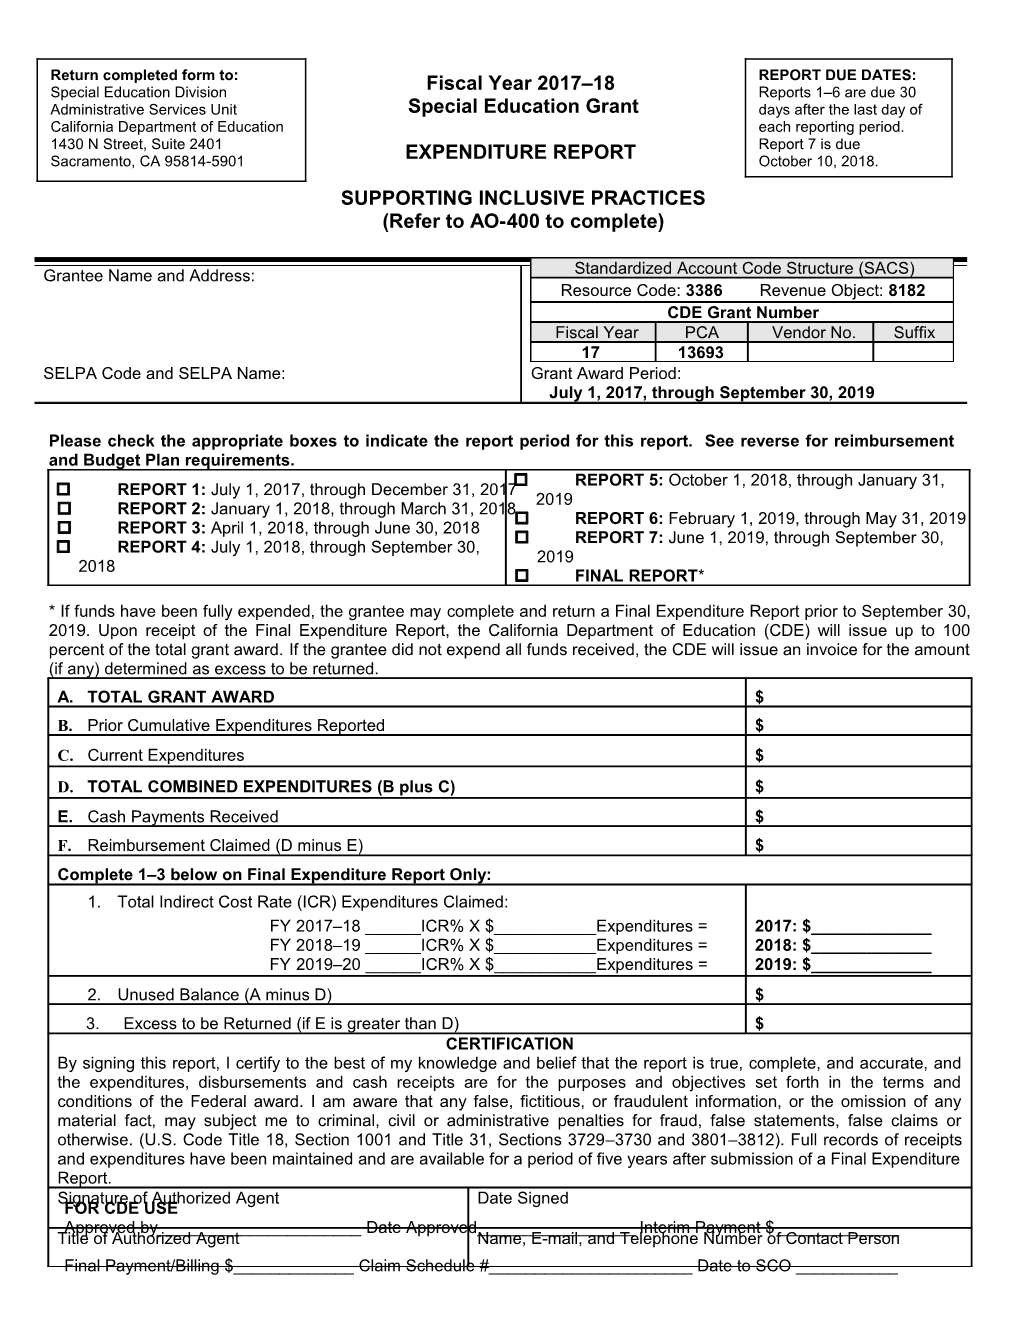 Form-17: Expenditure Report PCA 13693 SIP - Administration & Support (CA Dept of Education)